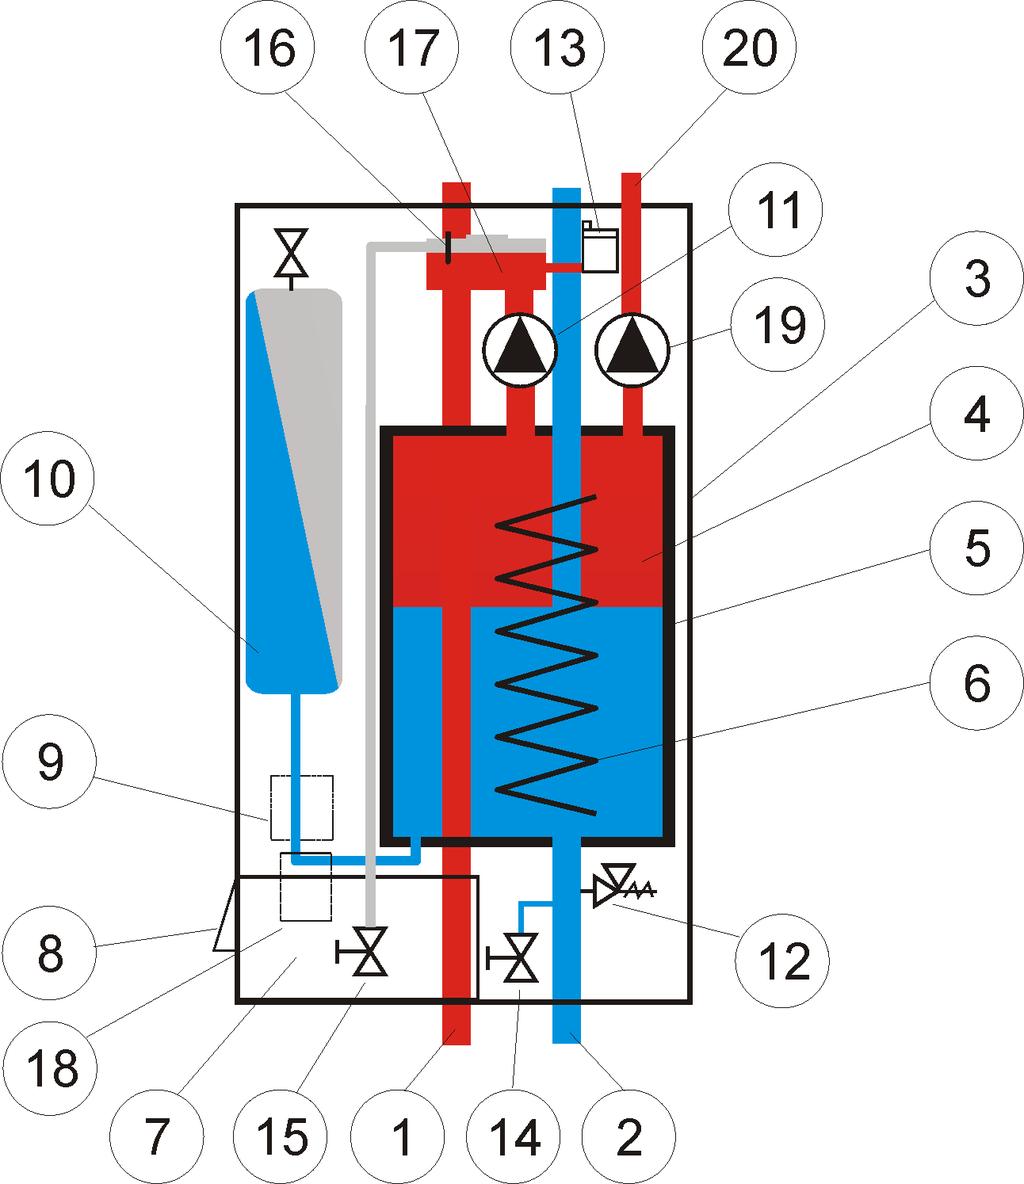 Termo Blok PTV 1. Primary flow 11. Circulation pump 2. Return flow 12. Safety valve on 2,5 bars 3. External boiler jacket 13. Automatic venting valve 4. Boiler 14. Charge and discharge valve 5.